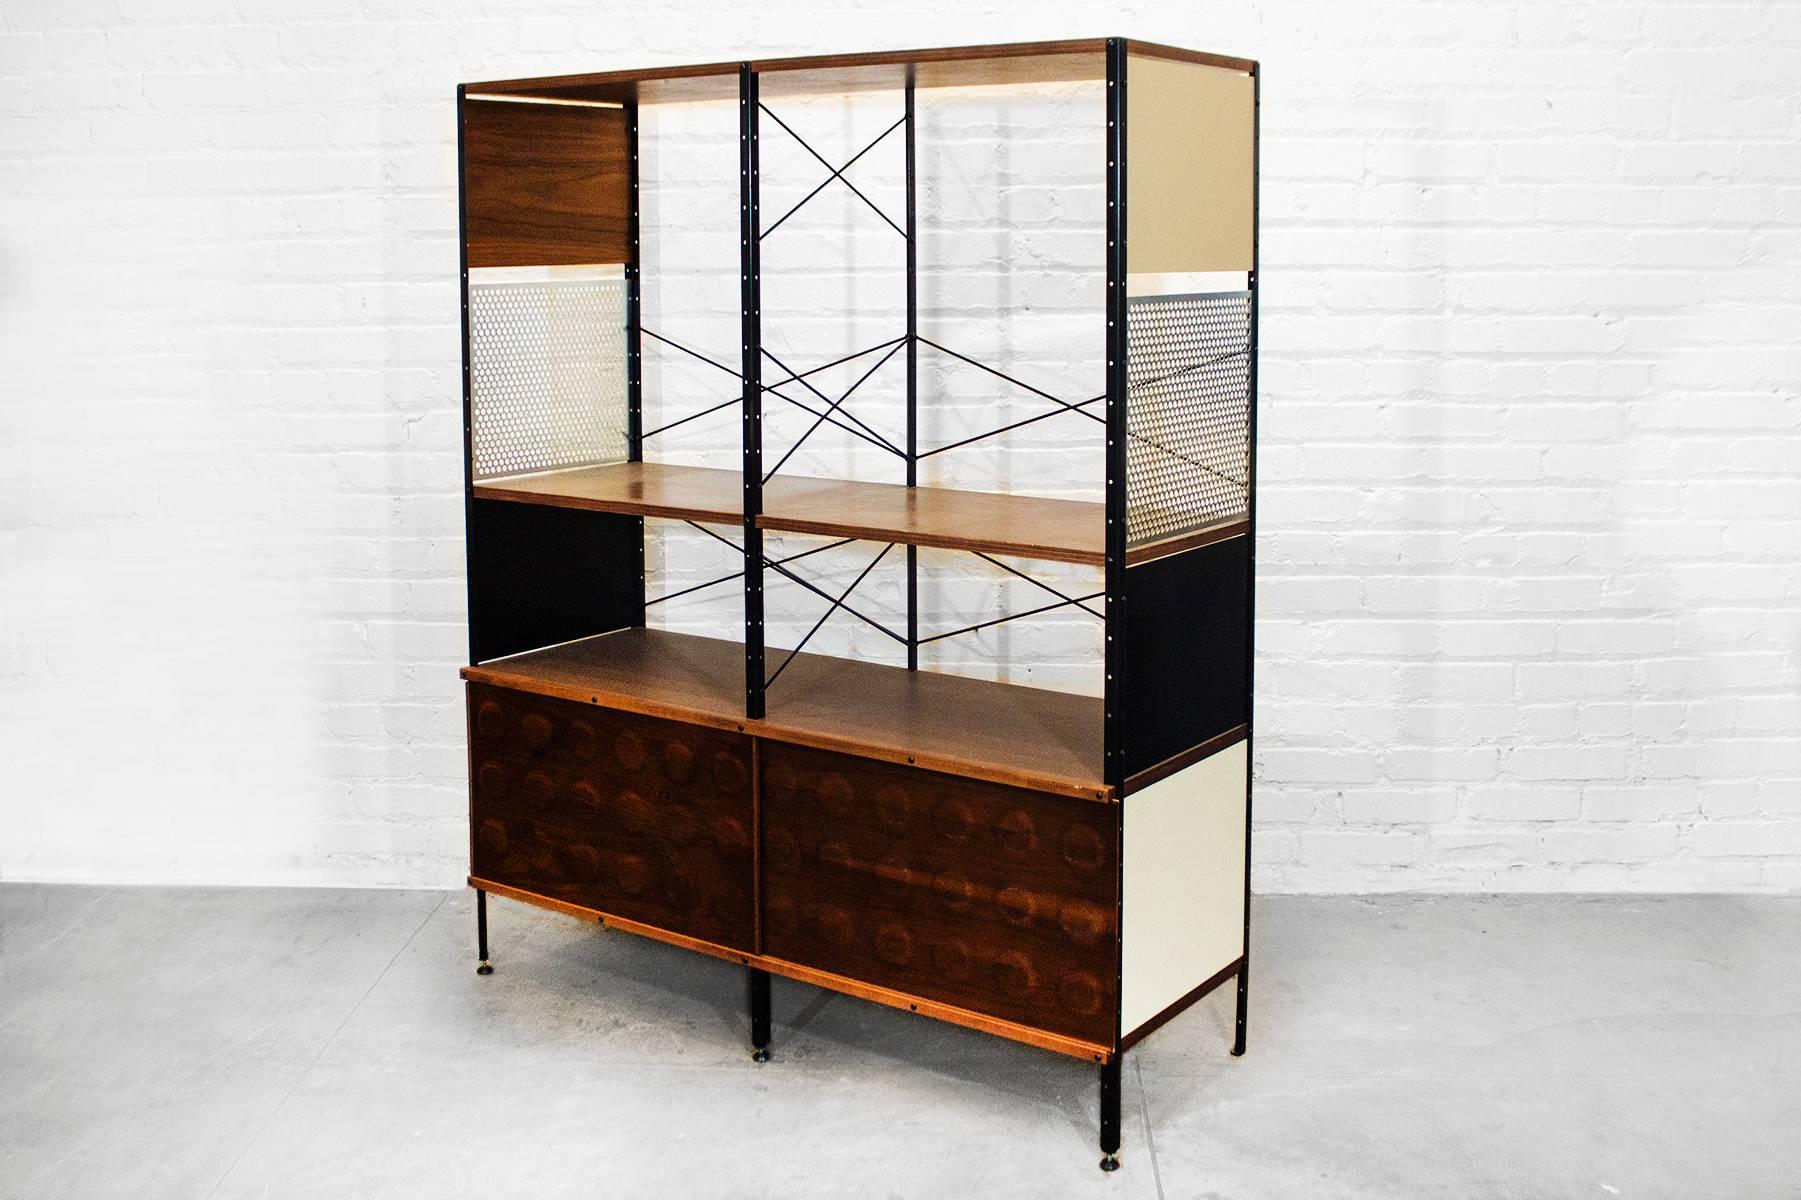 Reproduction of the Classic Eames case study shelving from Modernica in Los Angeles, CA features two shelves with sliding door cabinets on the bottom. 

Dimensions: 16